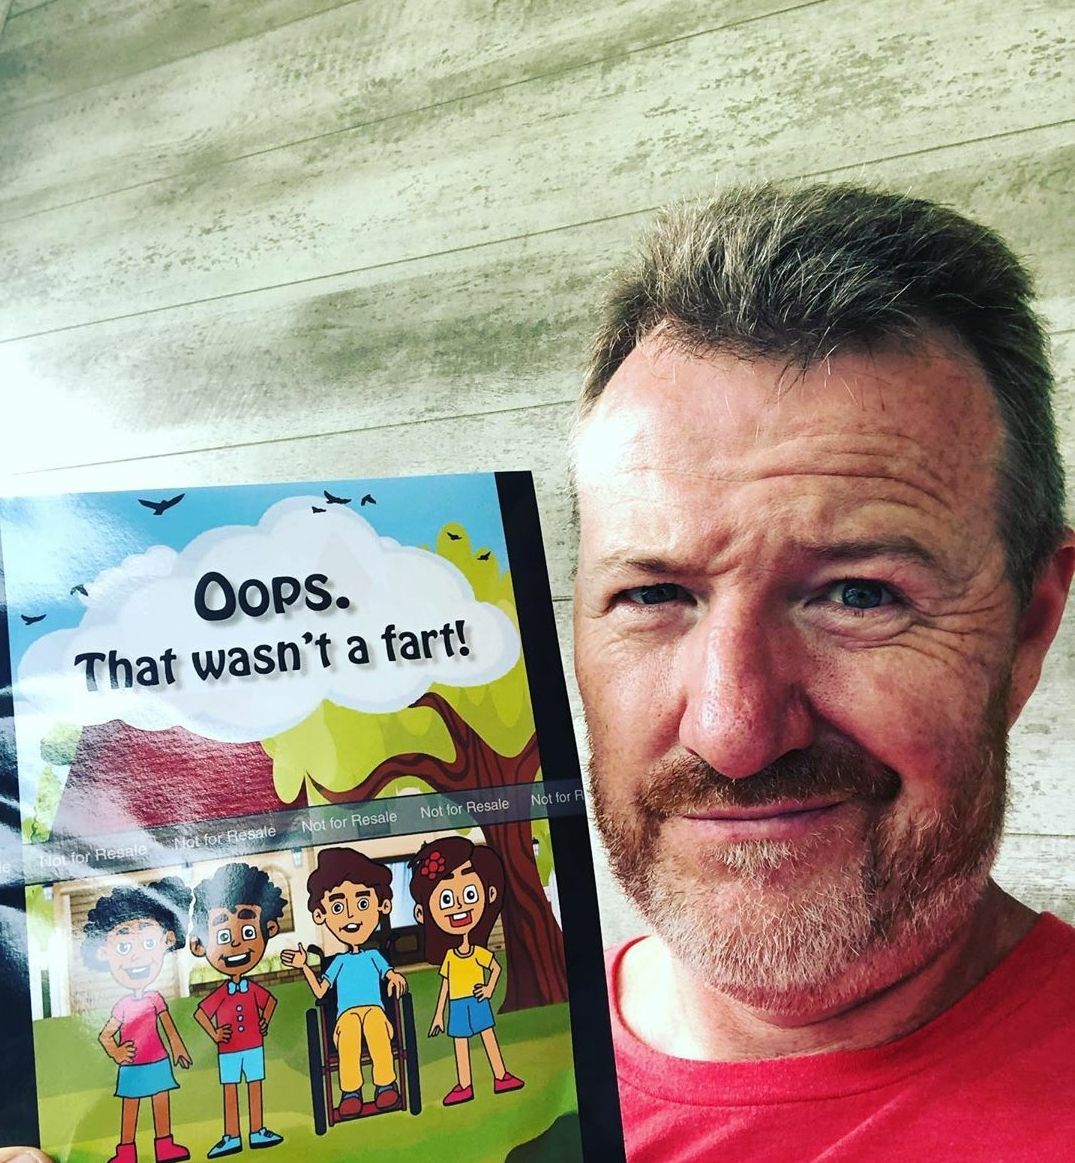 A friend of mine has used the quarantine to become a children's book author. I can't believe this is real.